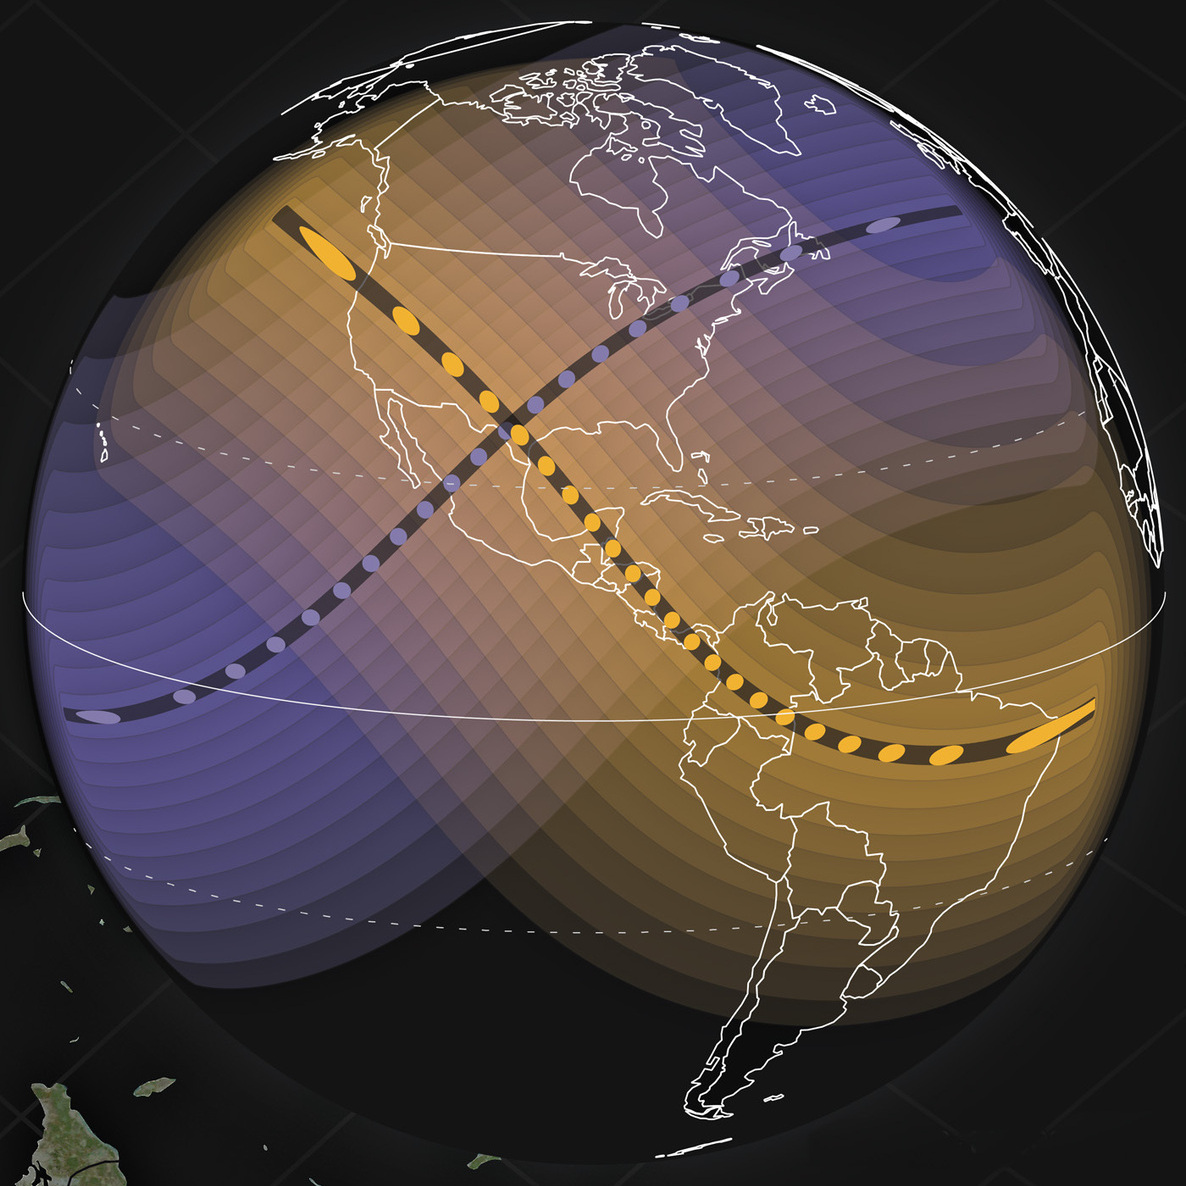 Two eclipse paths intersecting to make an "X" across the globe.